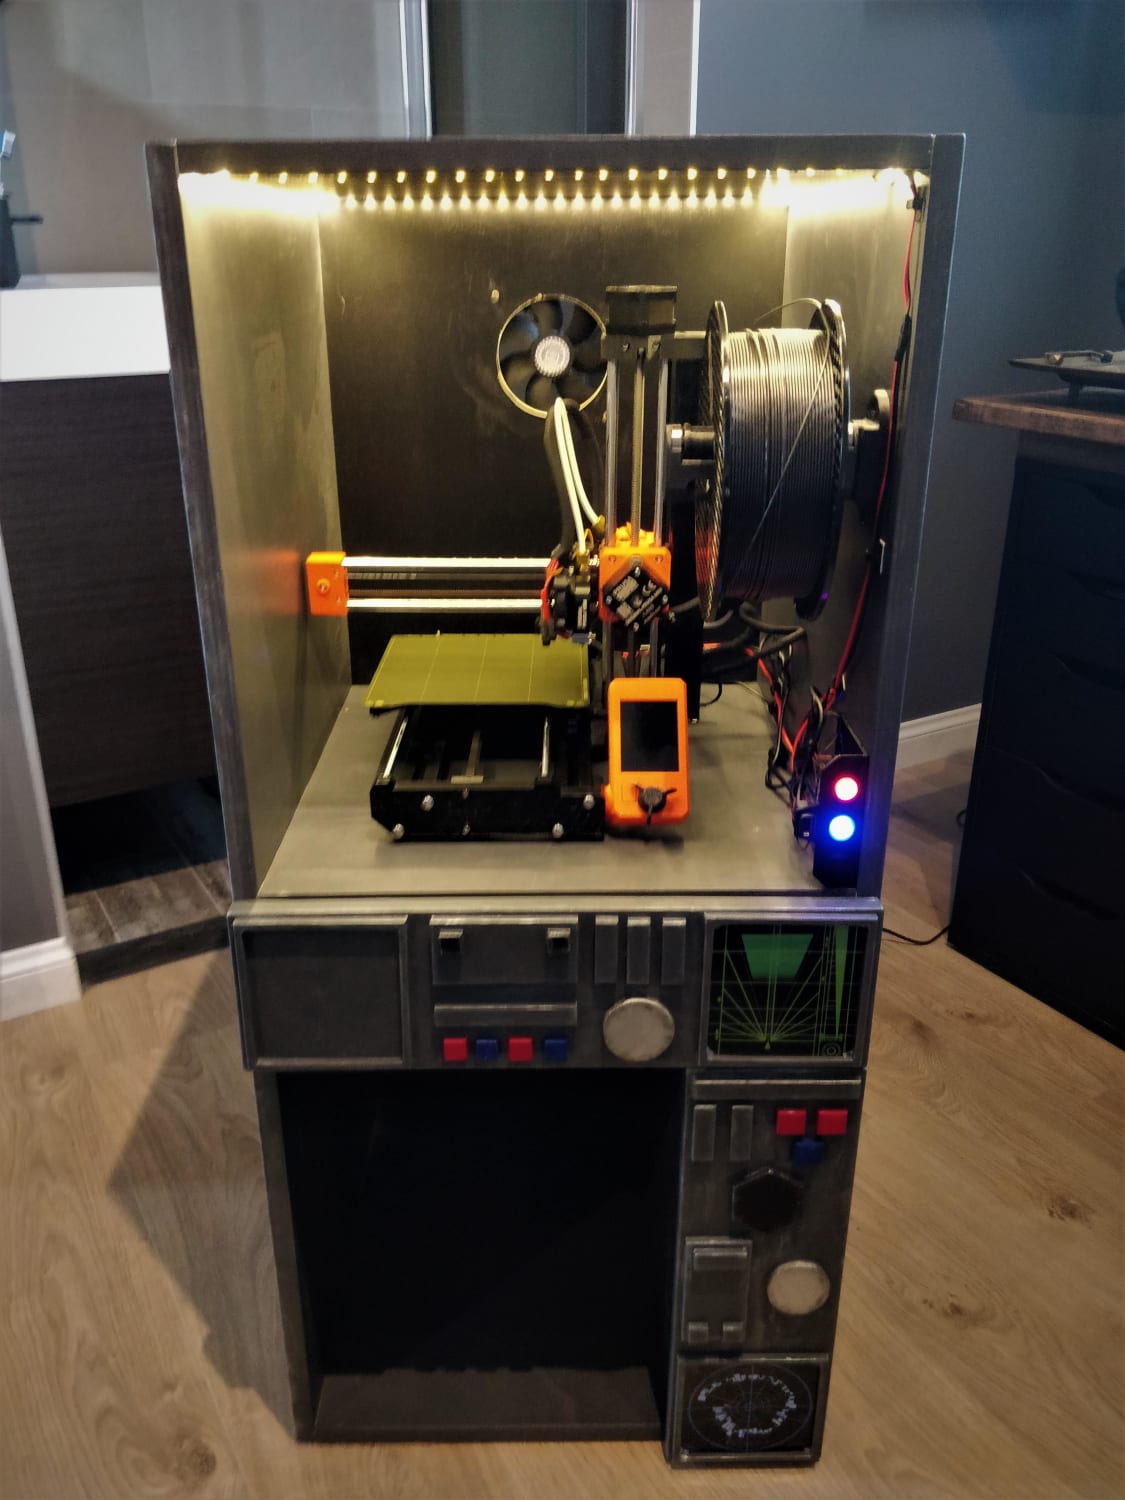 My take on a Star Wars inspired 3D printer enclosure